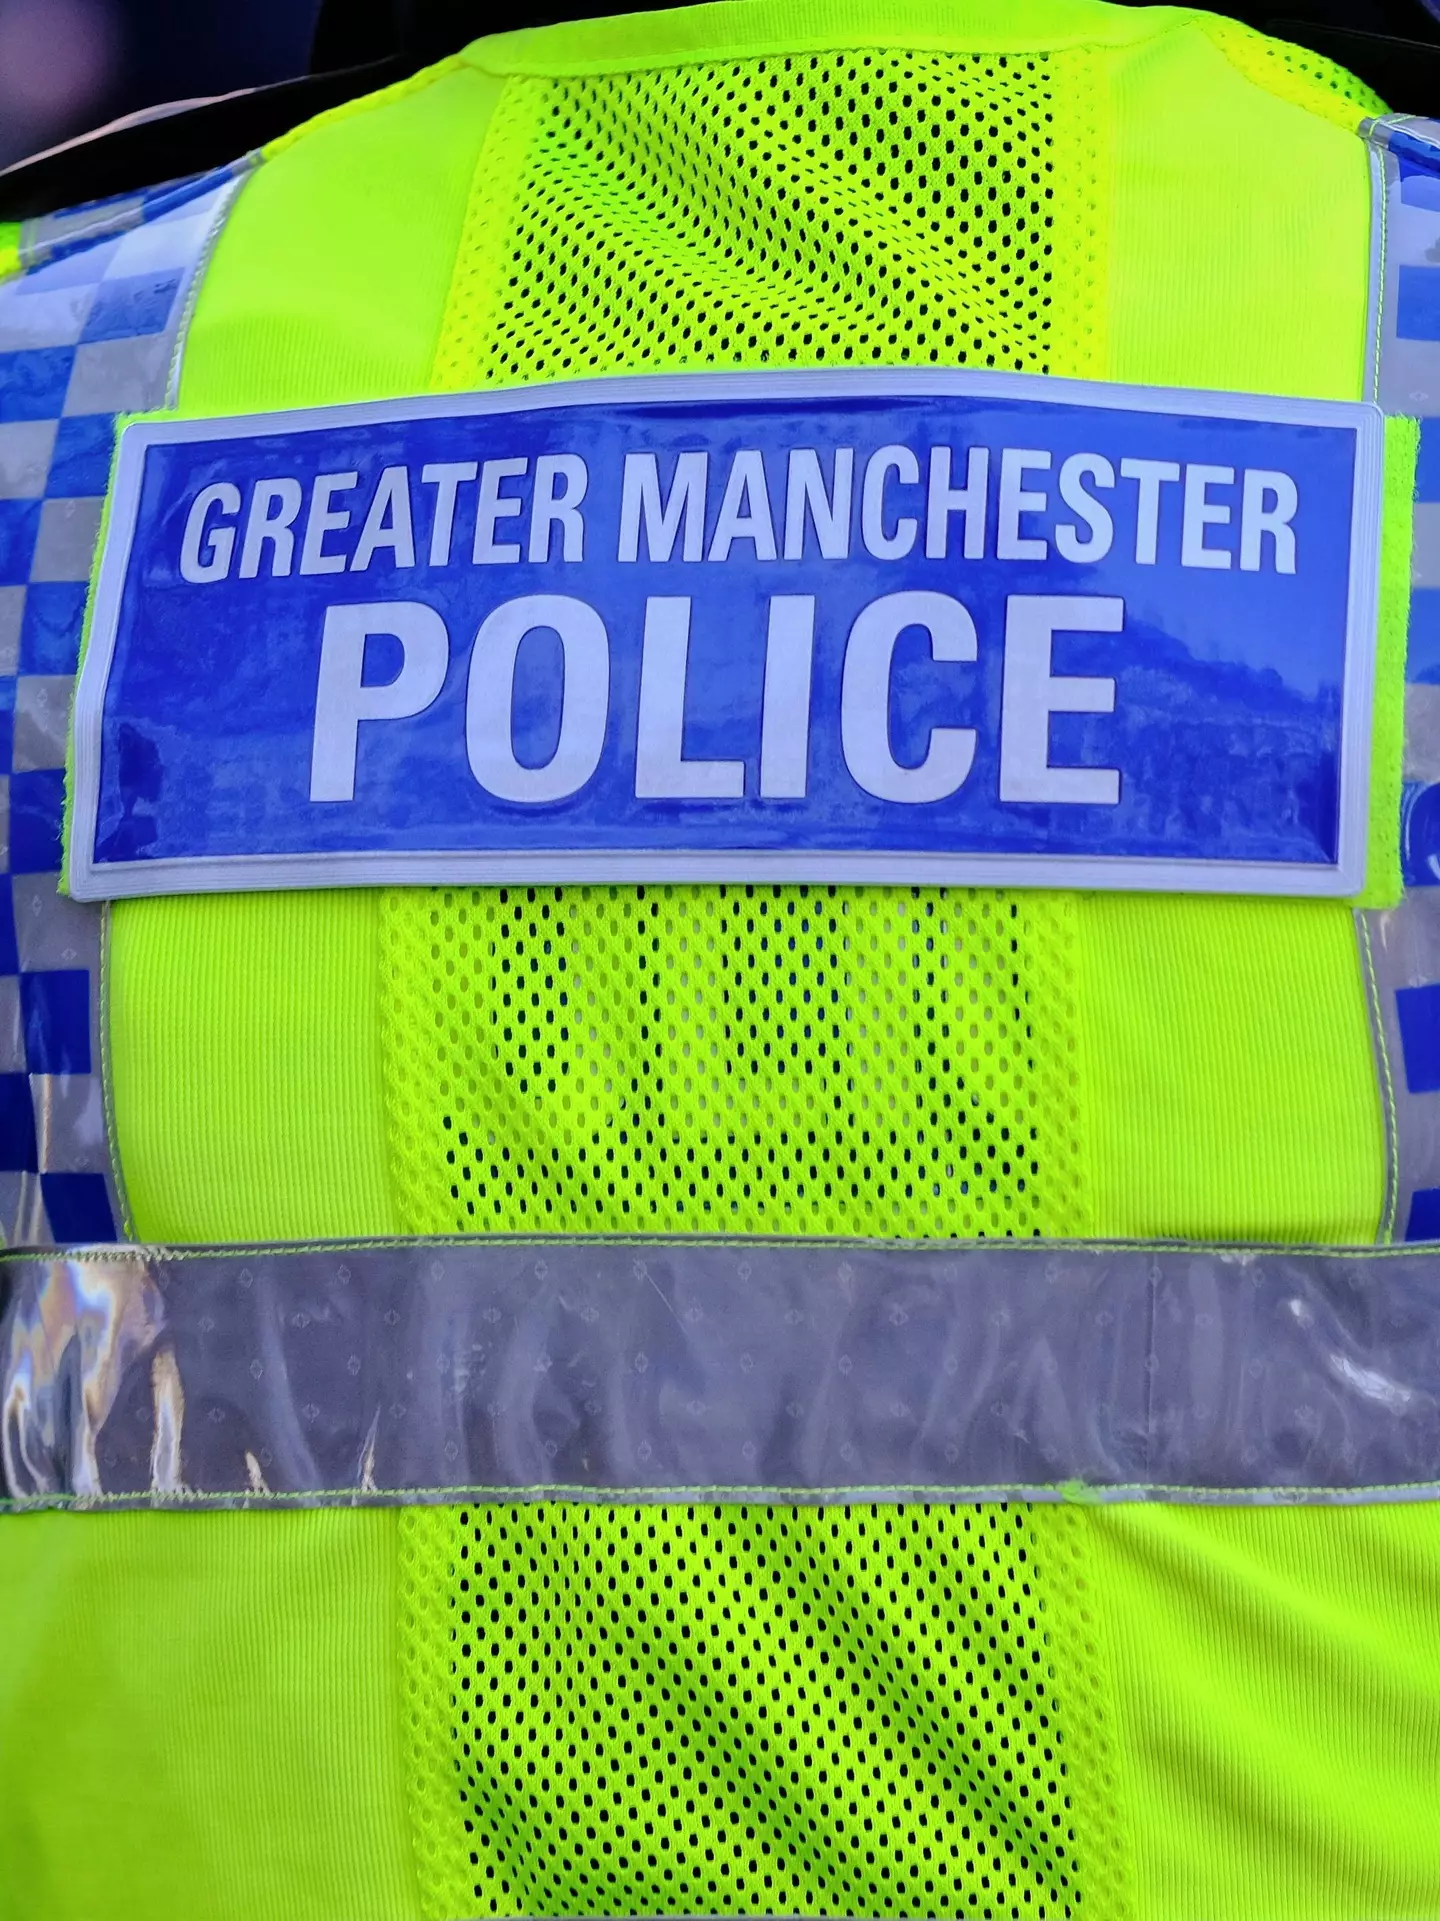 Greater Manchester recorded a total of 128.5 crimes per 1,000 people.